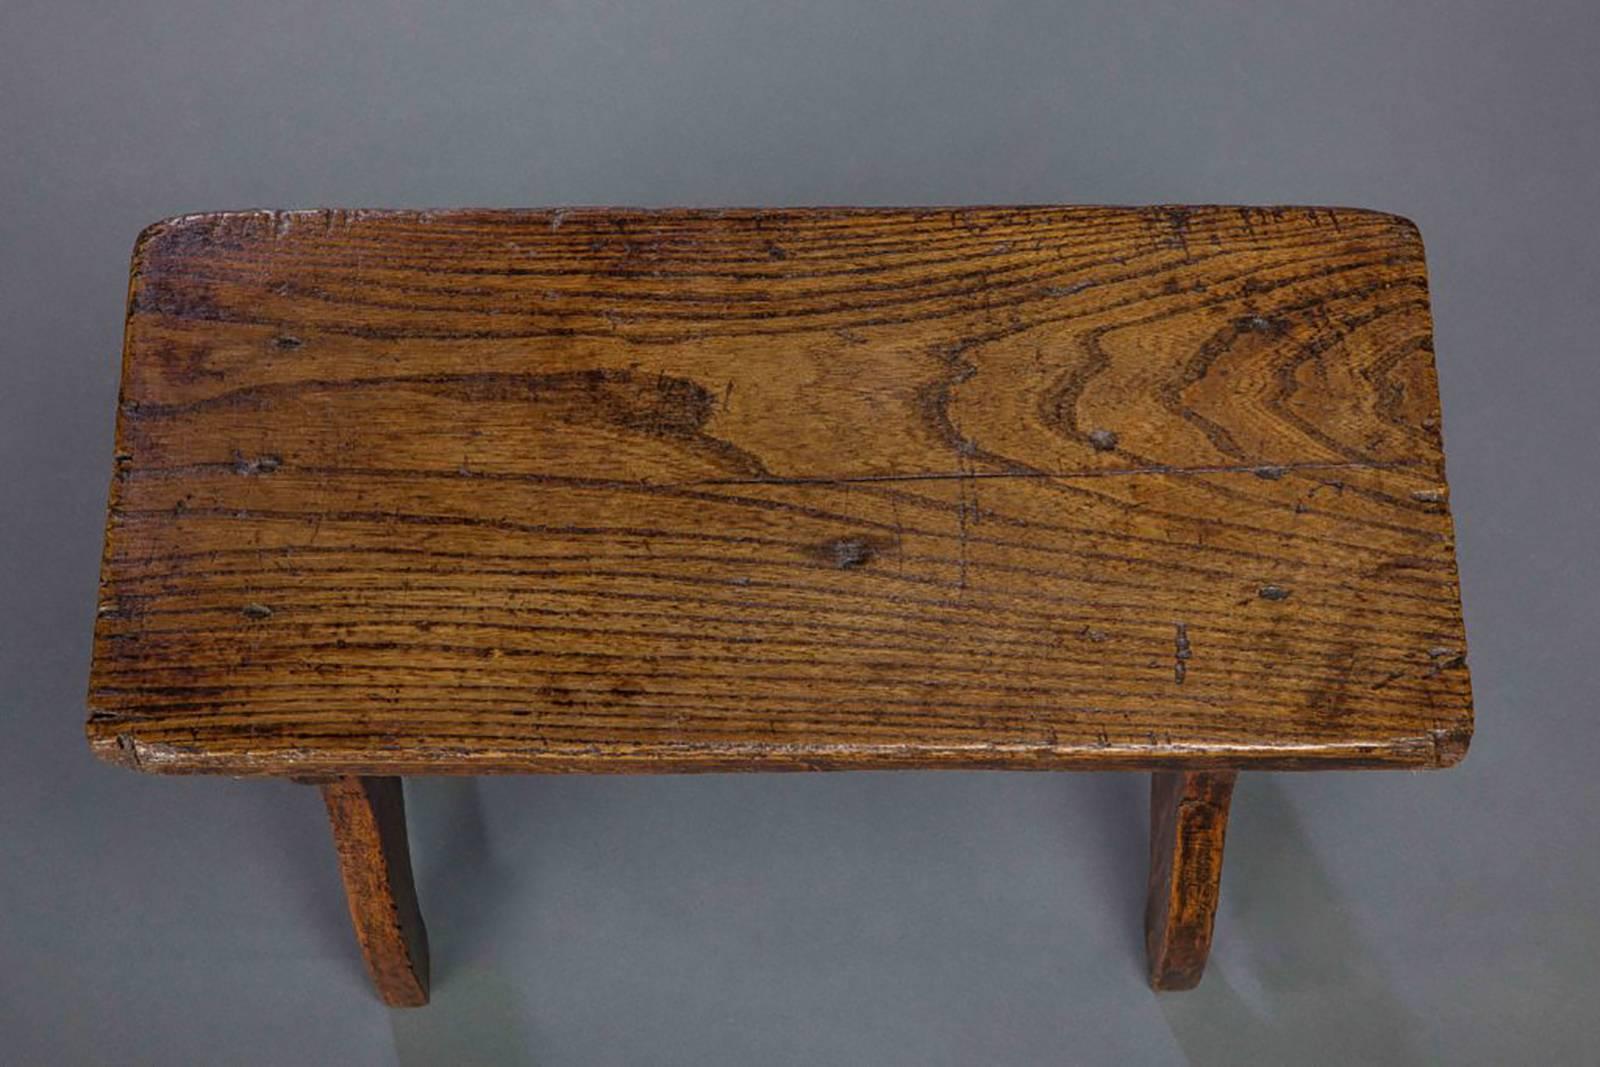 Of boarded elm with a plank seat and ogee cut end bounds united by a turned stretcher. This rustic stool was made in the style of the late 16th century.

English, circa 1800.